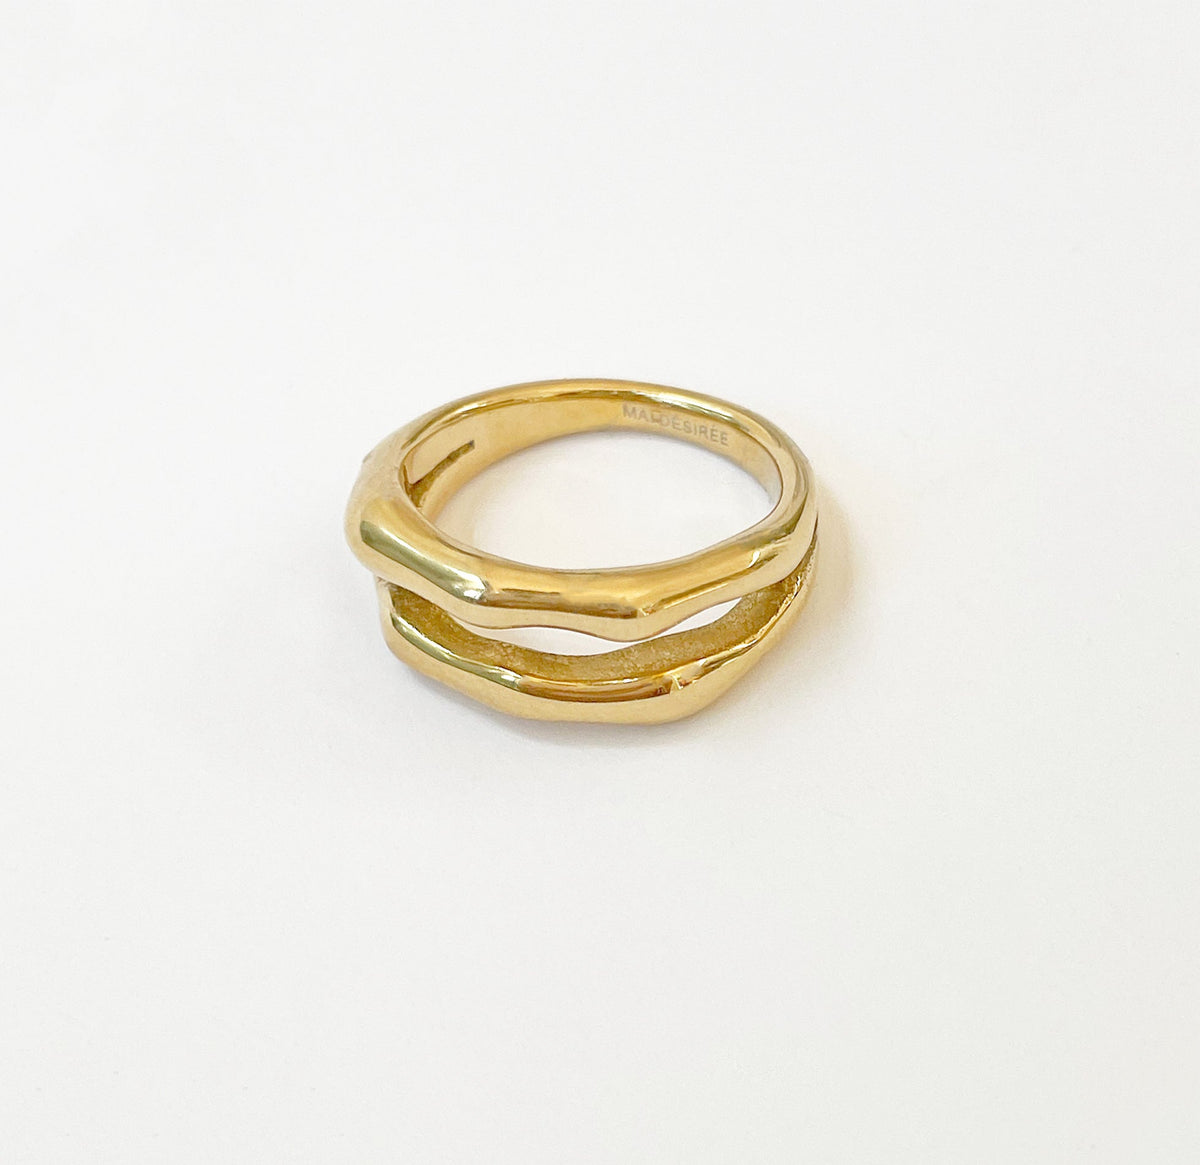 HALLIE GOLD DOUBLE BAMBOO BAND RING